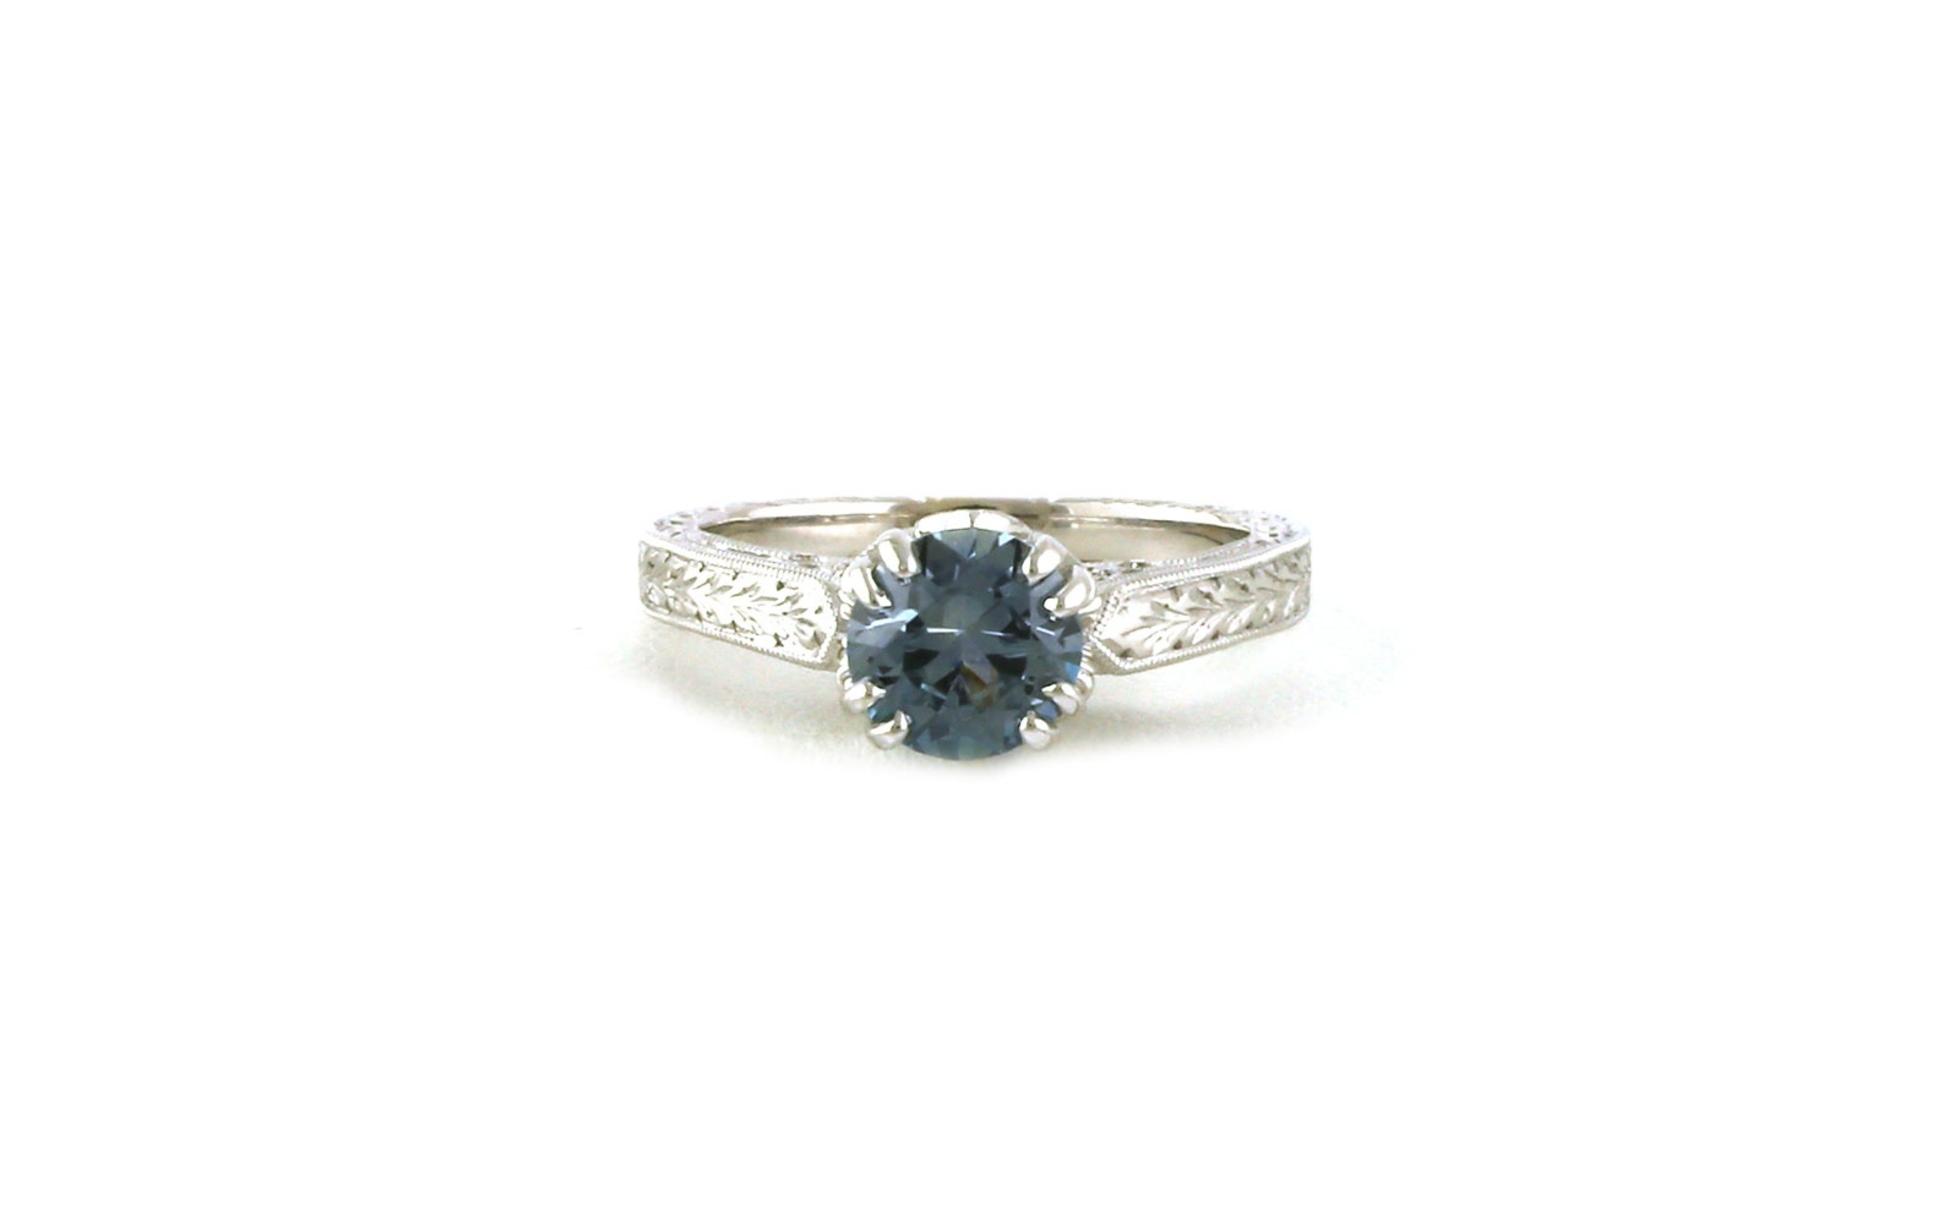 8-Prong Montana Sapphire Ring with Diamond Accented Crown and Hand Engraving Details in White Gold (1.32cts)